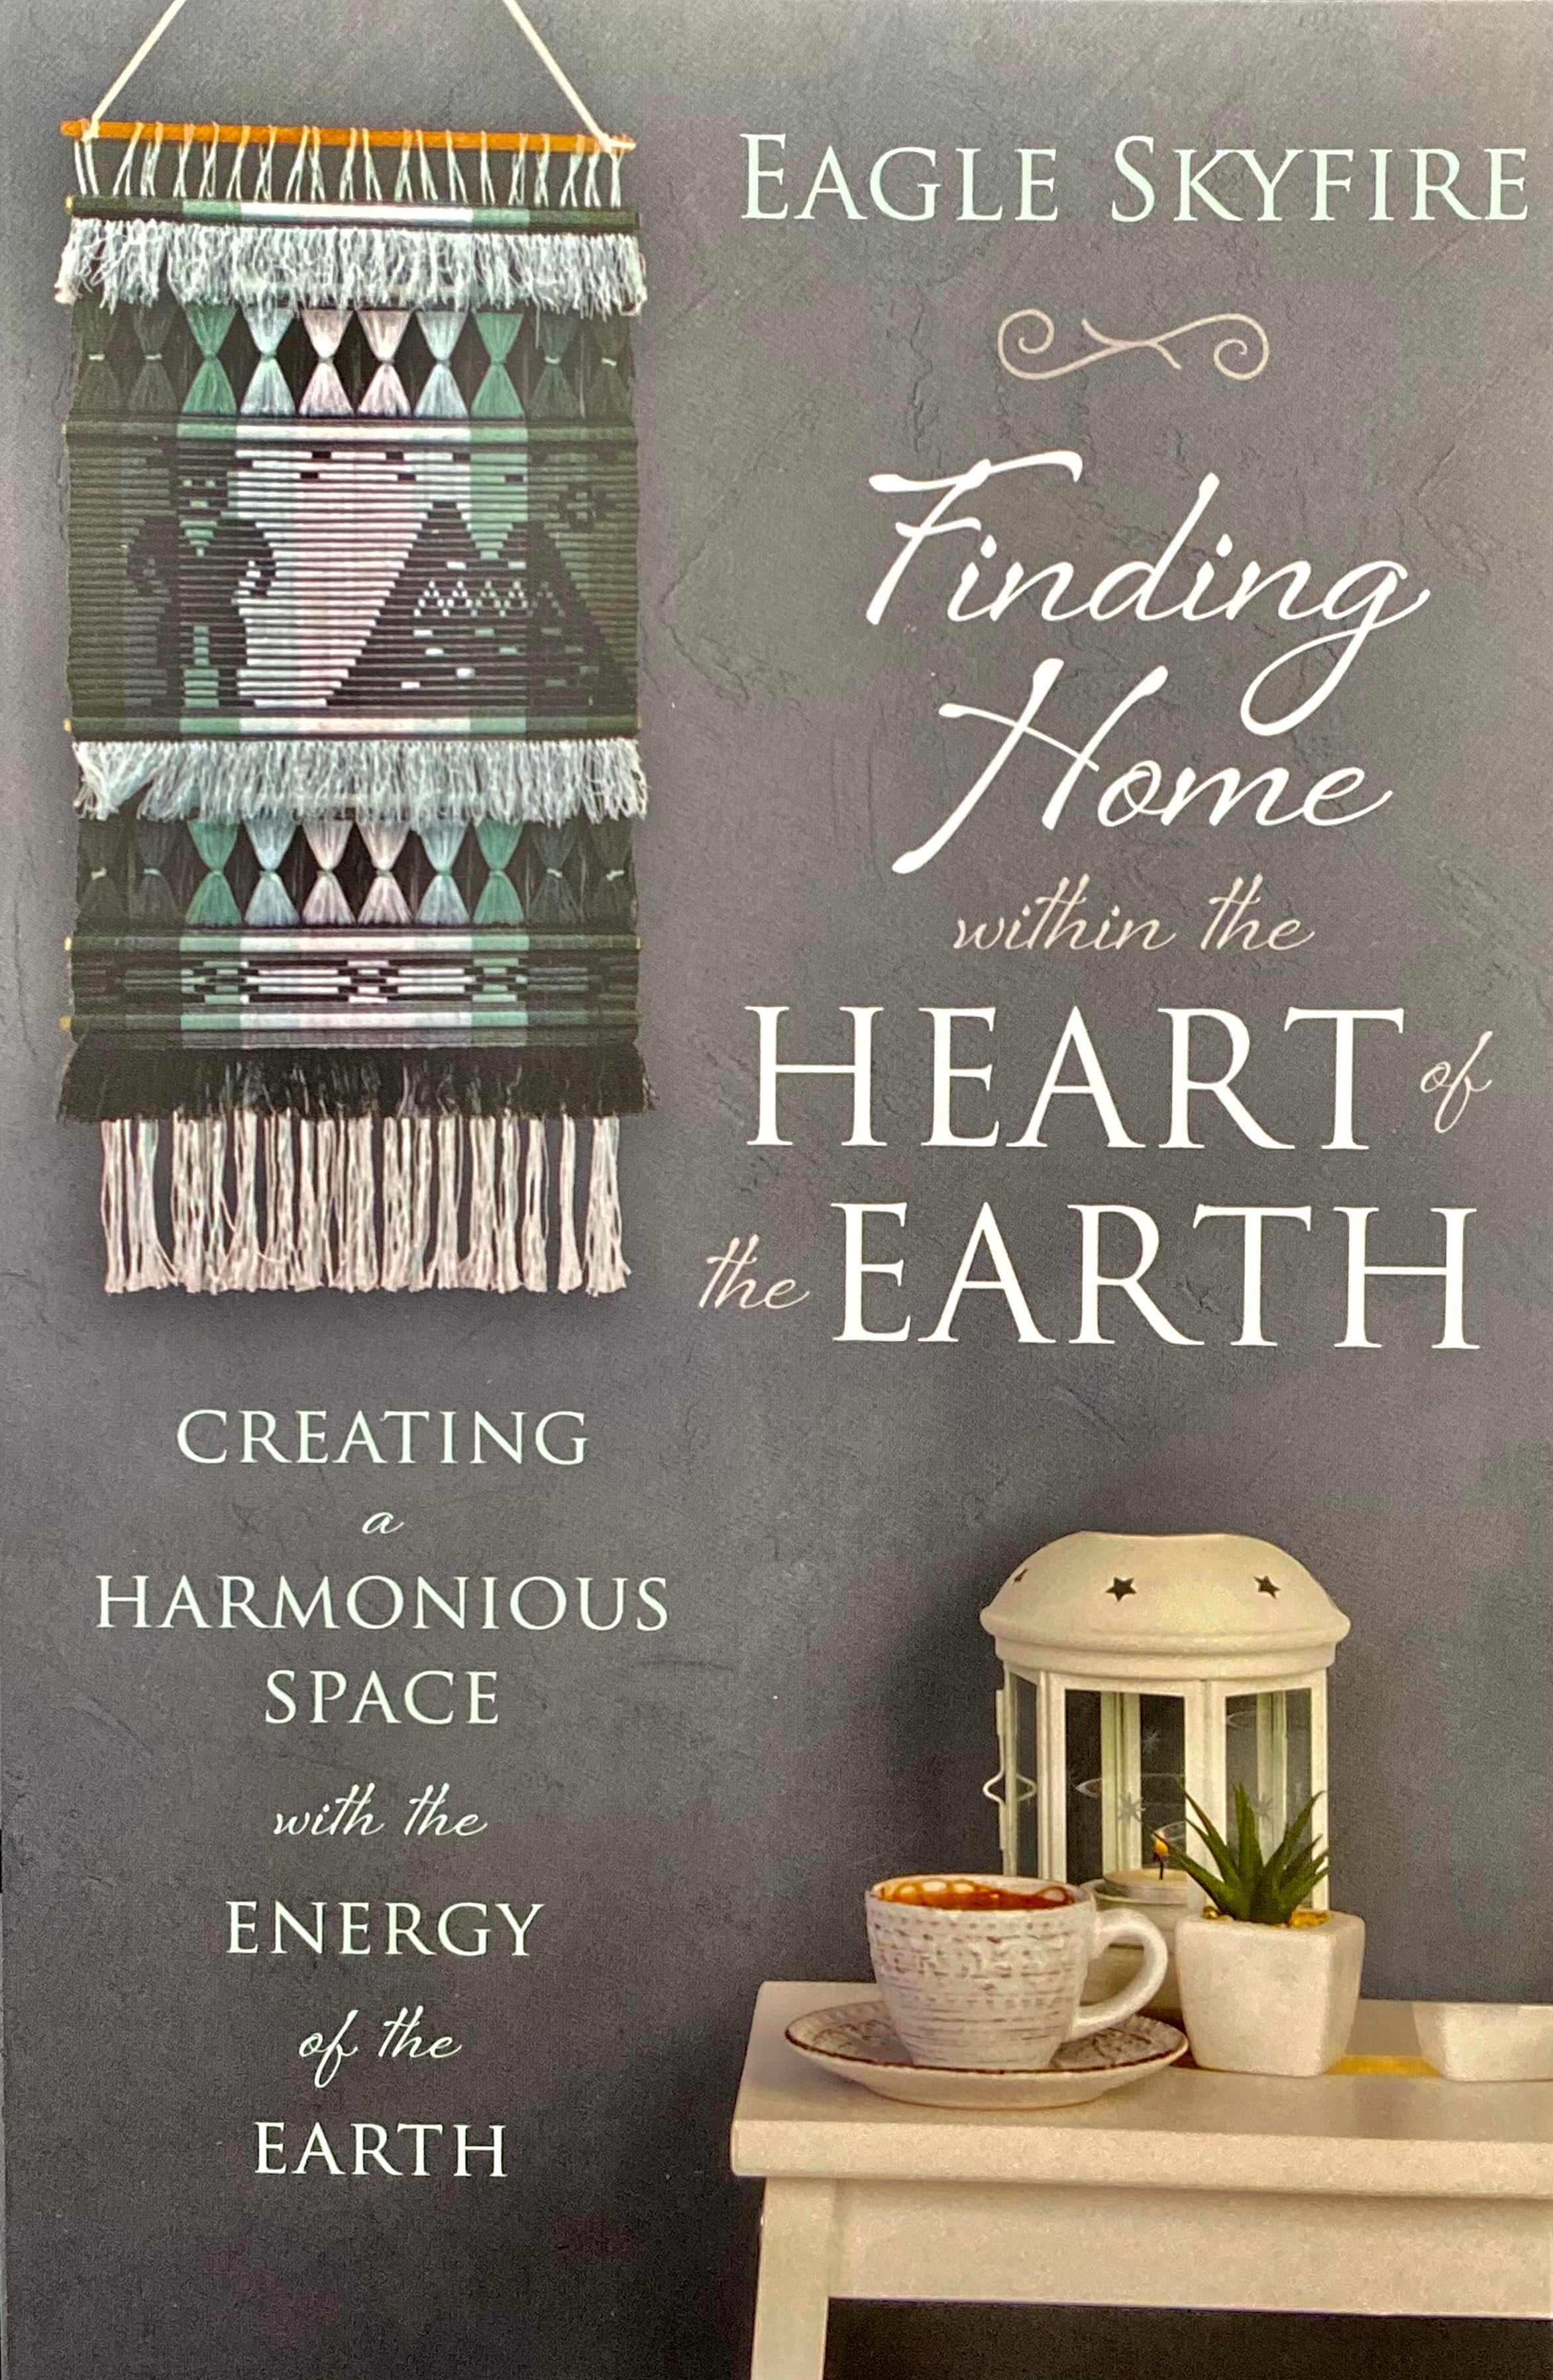 Finding Home within the Heart of the Earth